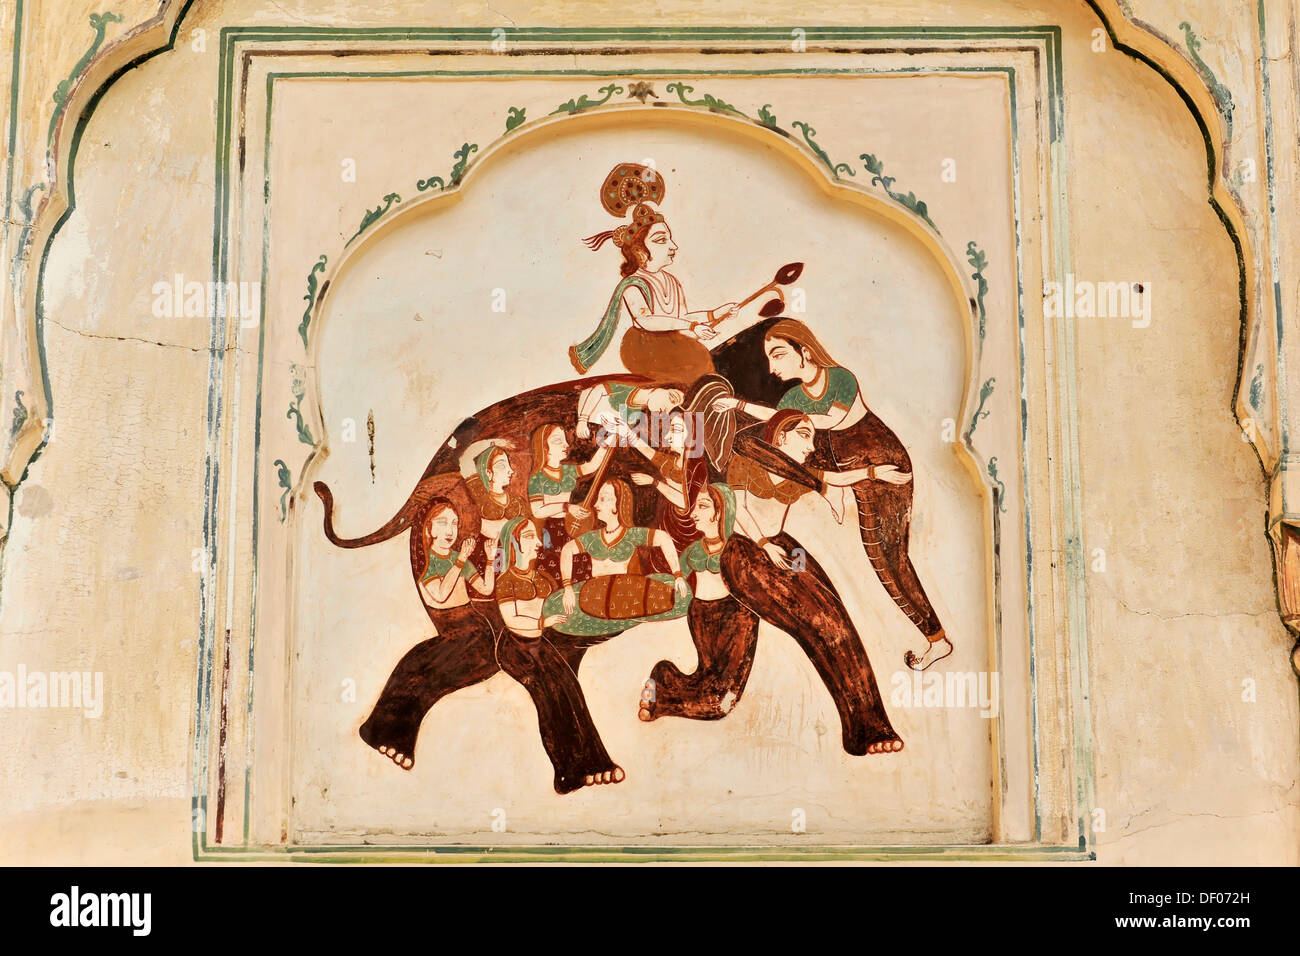 Riding elephant, illustration, wall relief, temple, Galta gorge, Jaipur, Rajasthan, northern India, Asia Stock Photo